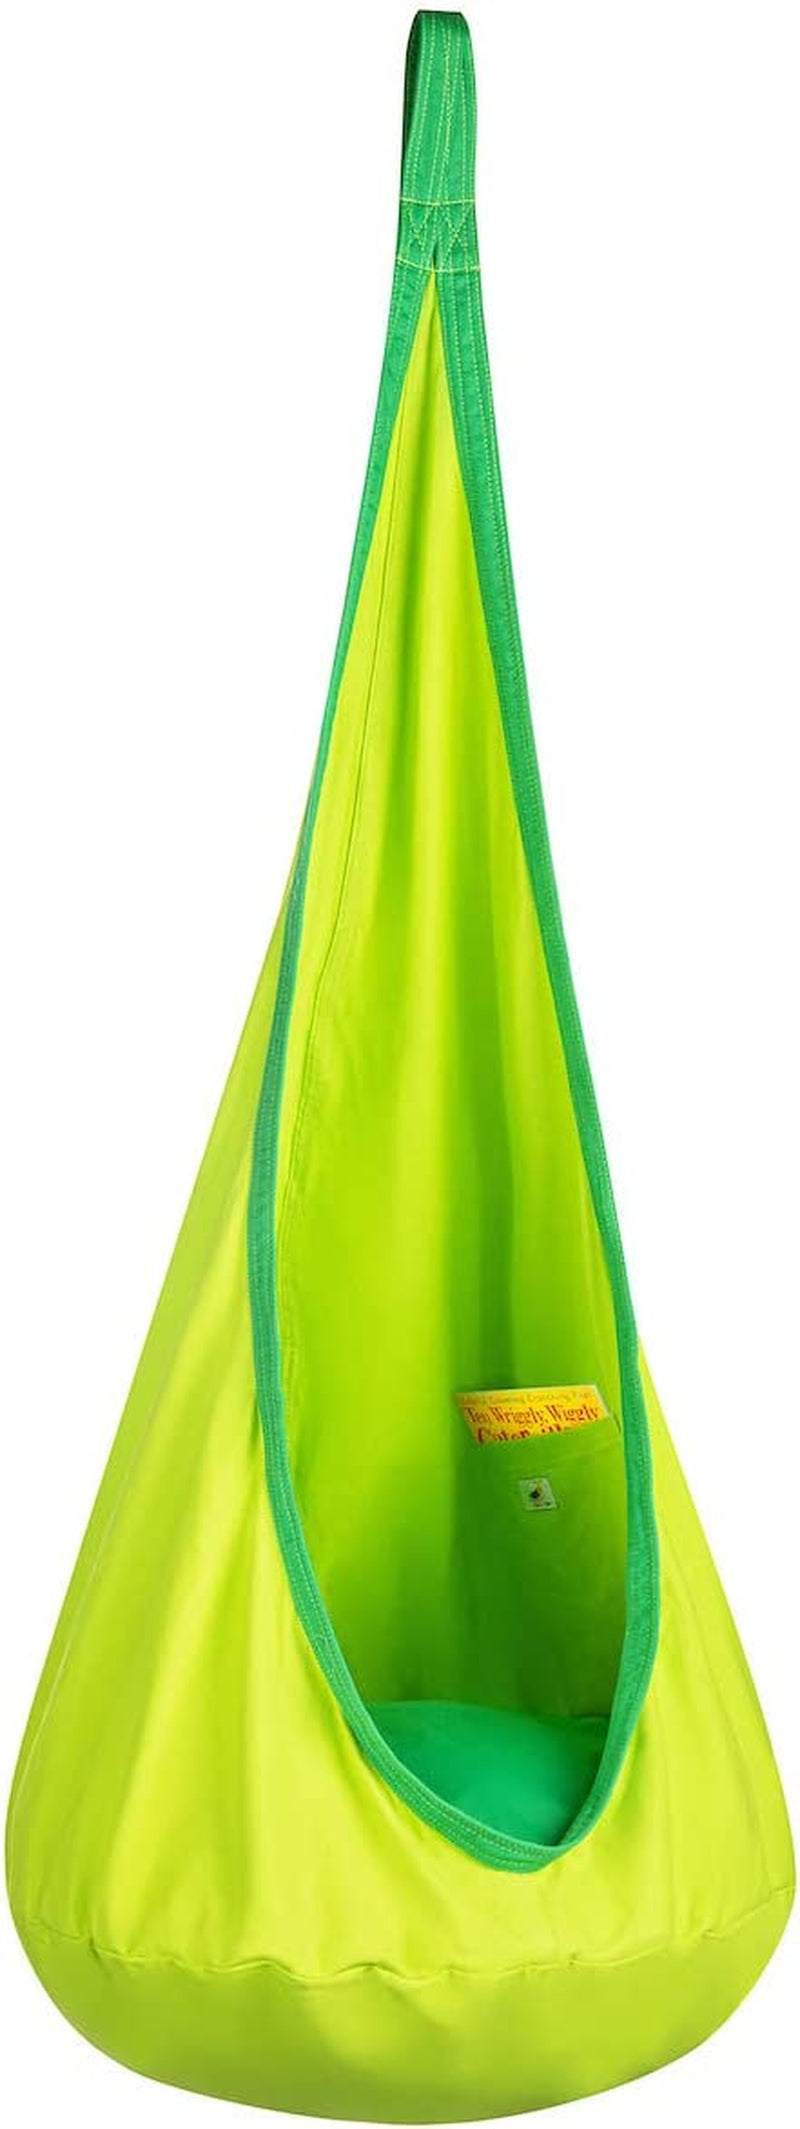 Appomattox Kids, Kids Child Pod Swing Chair W/Interior Pocket, Hanging Hammock, Indoor or Outdoor Fun, Reading Nook, Relaxation, Sensory Swing, Autism Toys Therapy, Easy to Hang Comfortable Nest, Girls and Boys(Green)